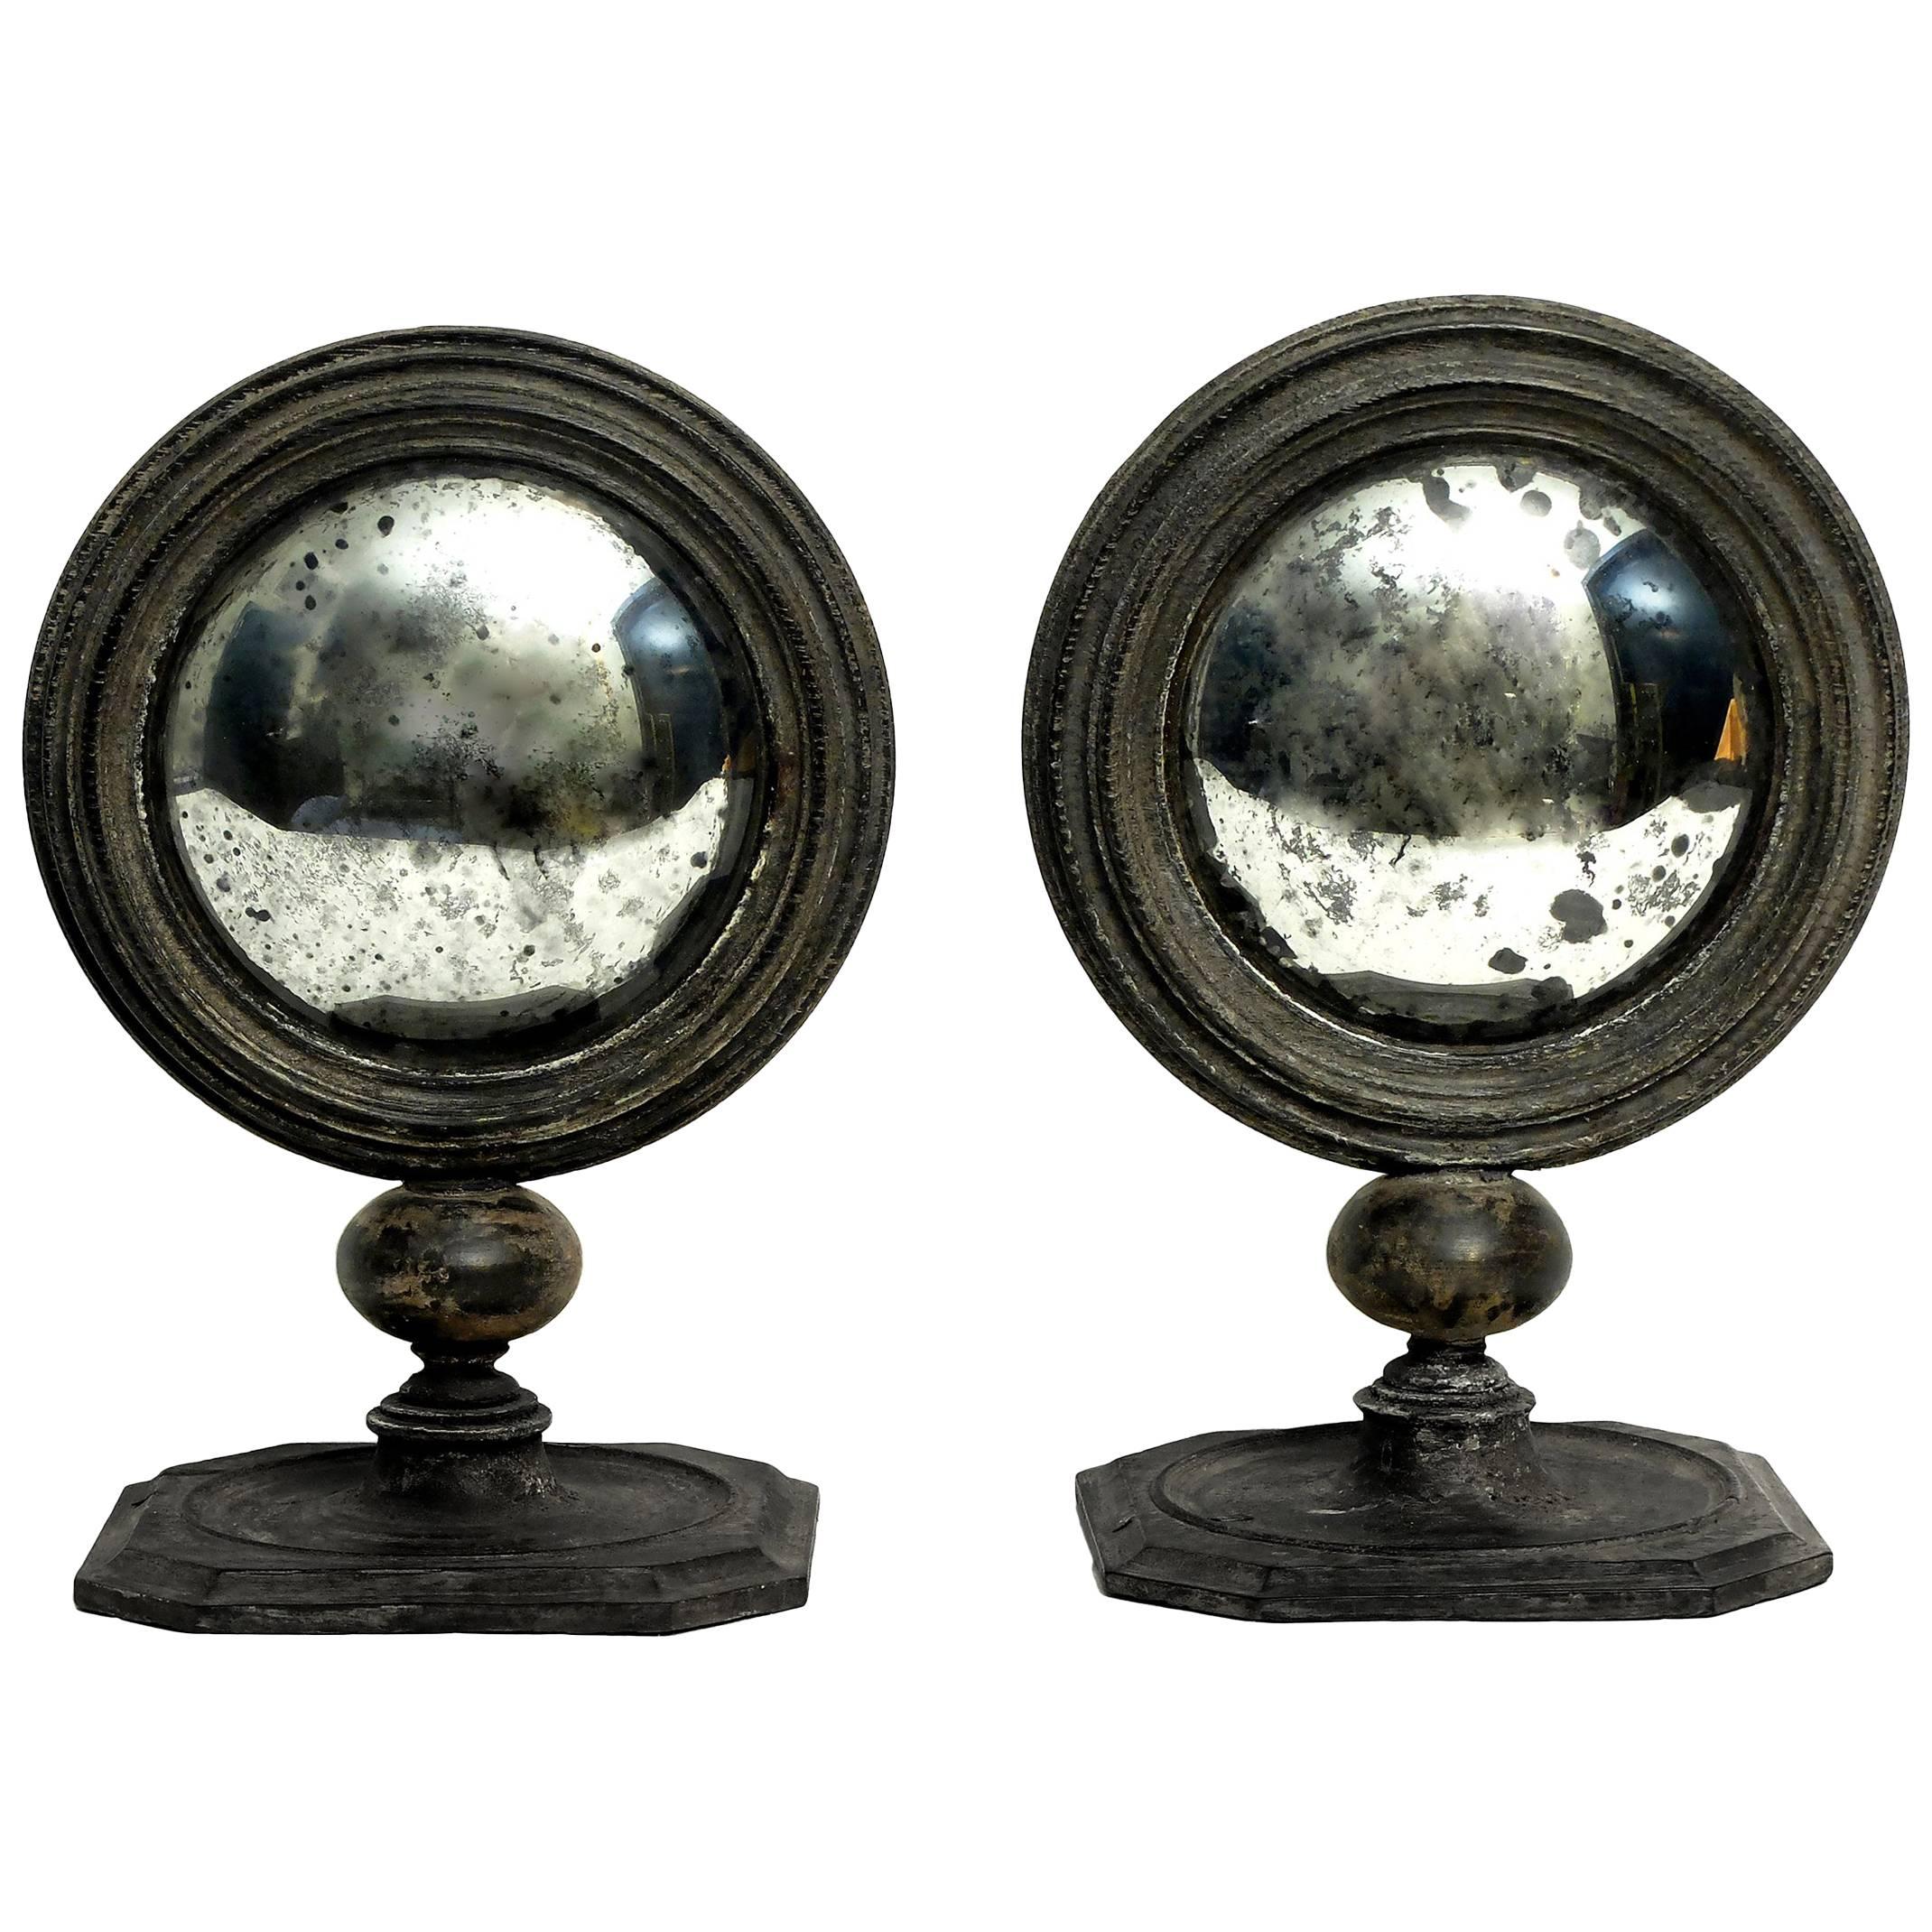 Pair of Wunderkammer Convex Round Table Mirrors, Italy, circa 1880